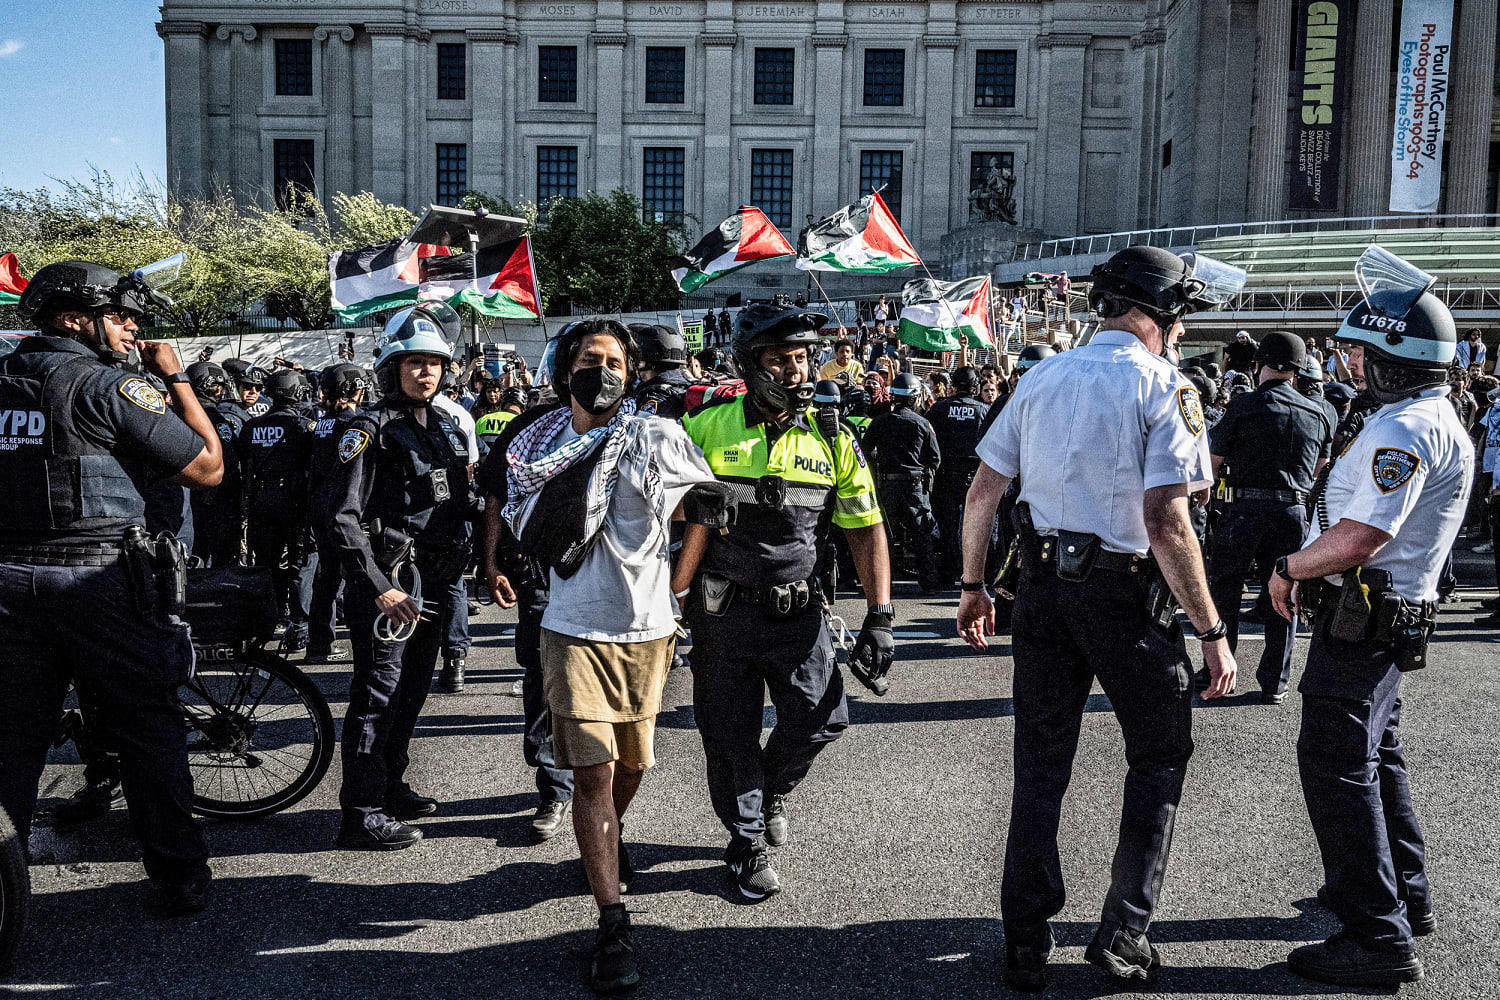 Police arrest 34 people at the Brooklyn Museum after pro-Palestinian protesters occupy building